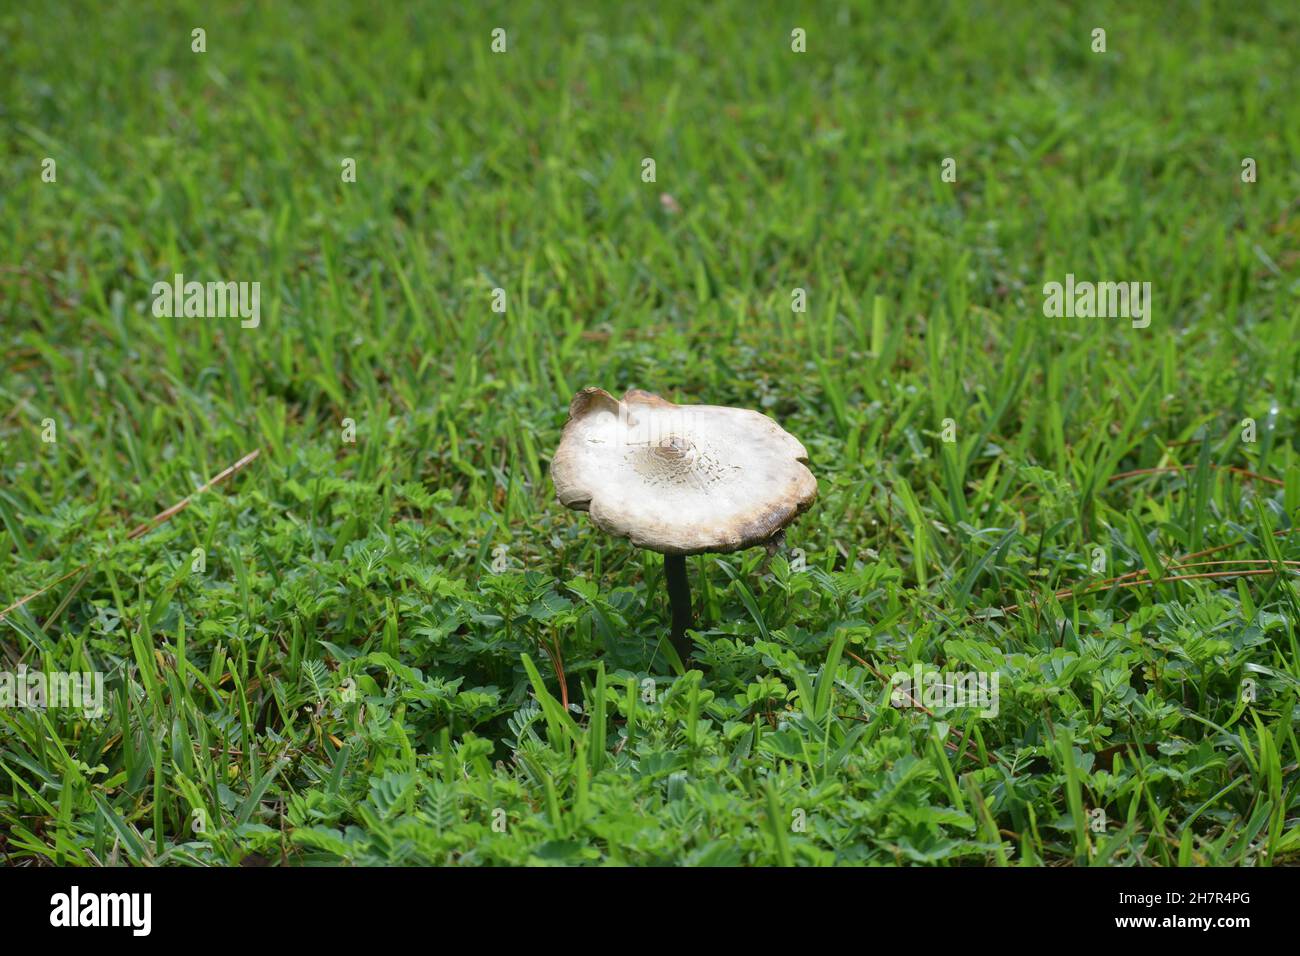 A dirty toadstool stands above a grassy area. Stock Photo